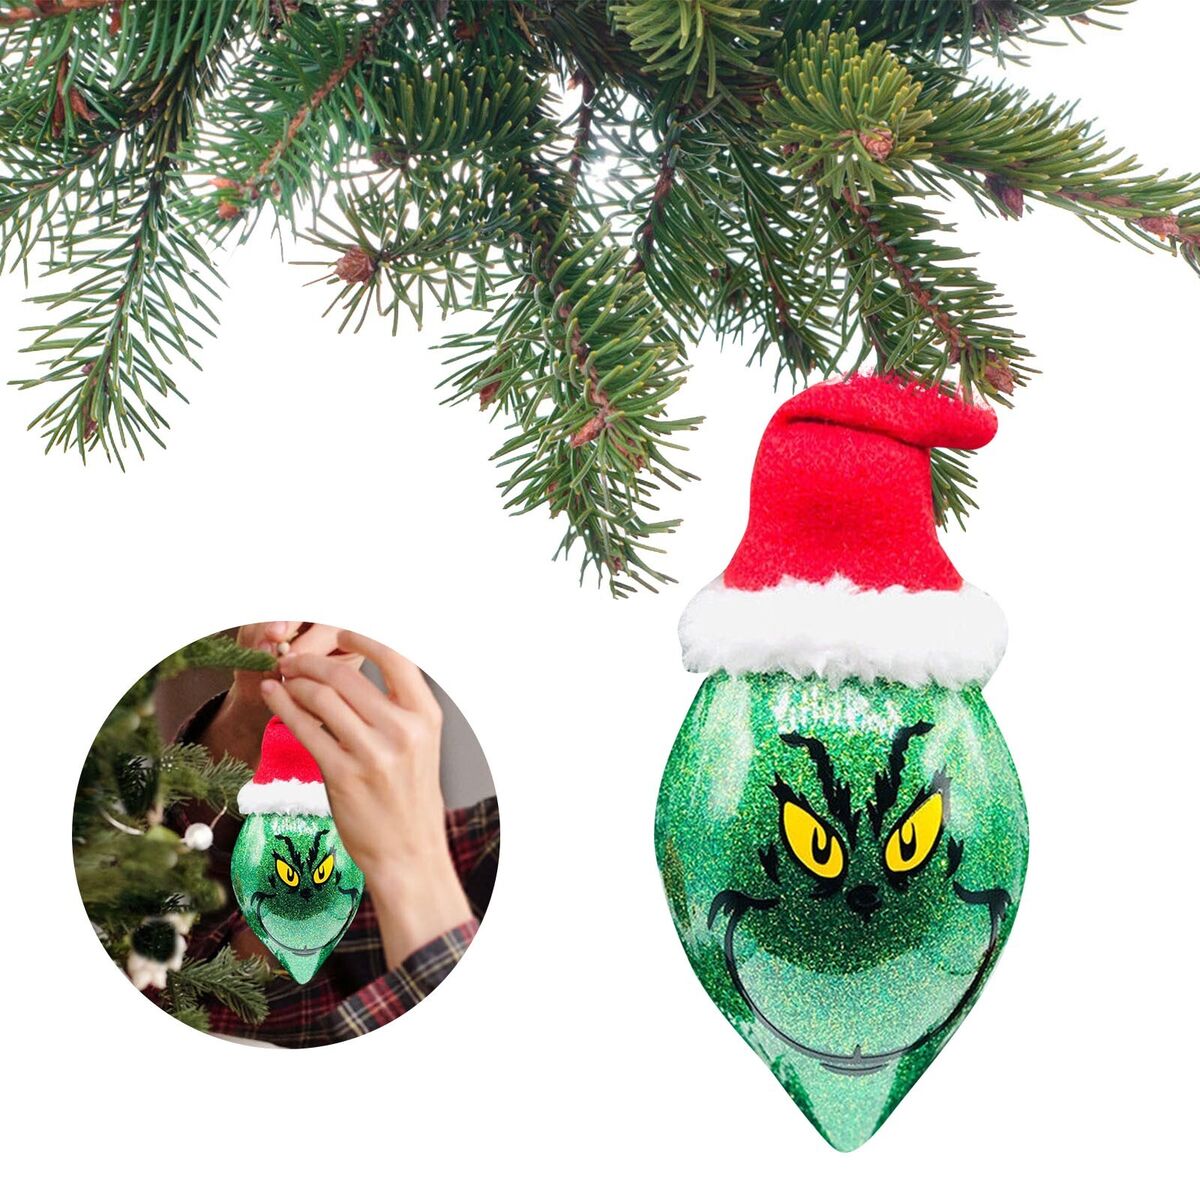 Grinch Christmas Ornaments Tree Decorations Wood Accessories